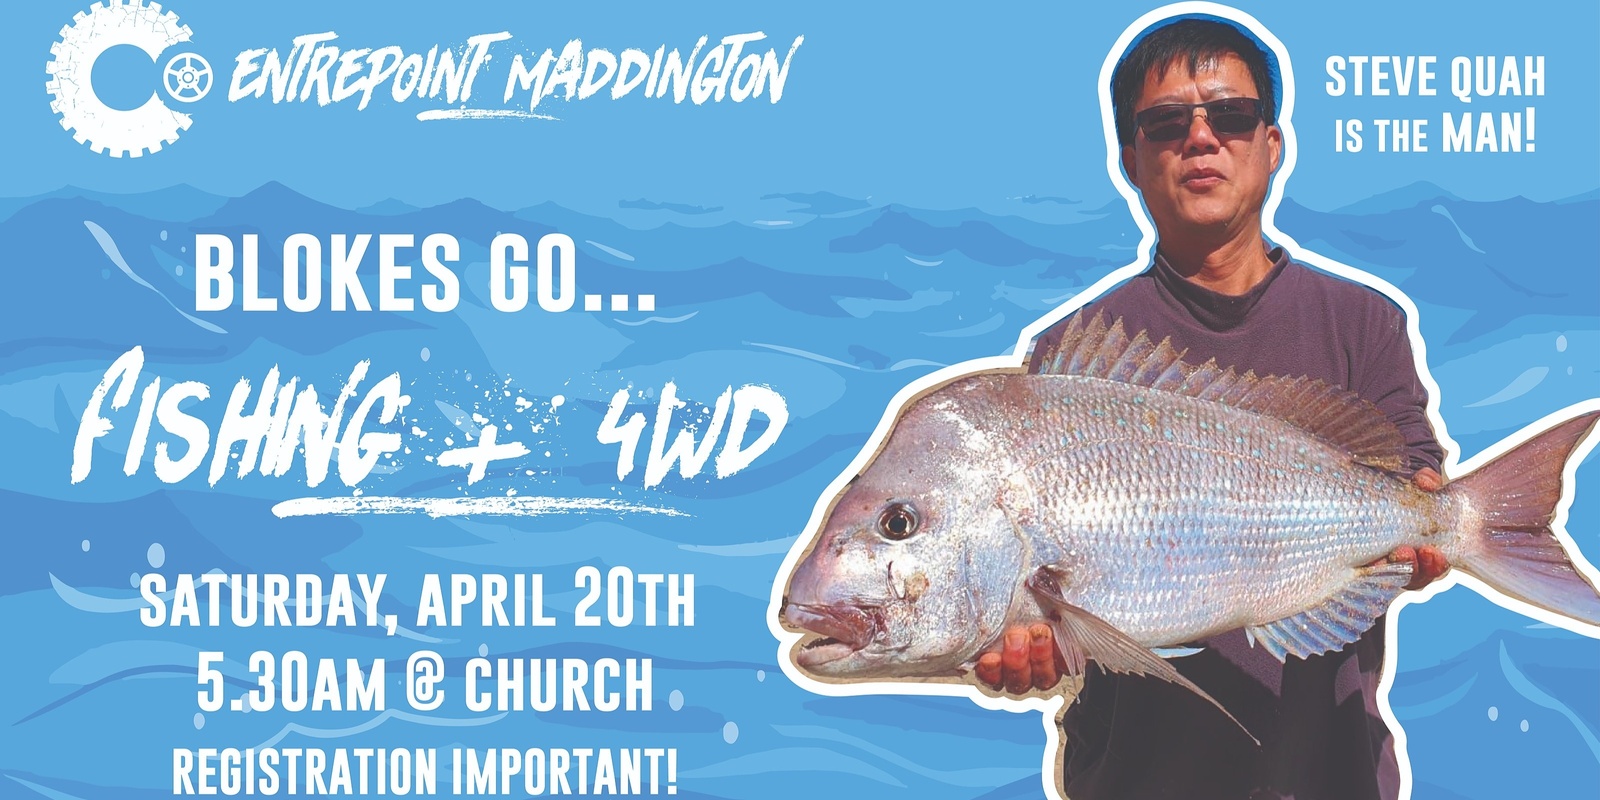 Banner image for Centrepoint Maddington Men's Fishing and FWDing 